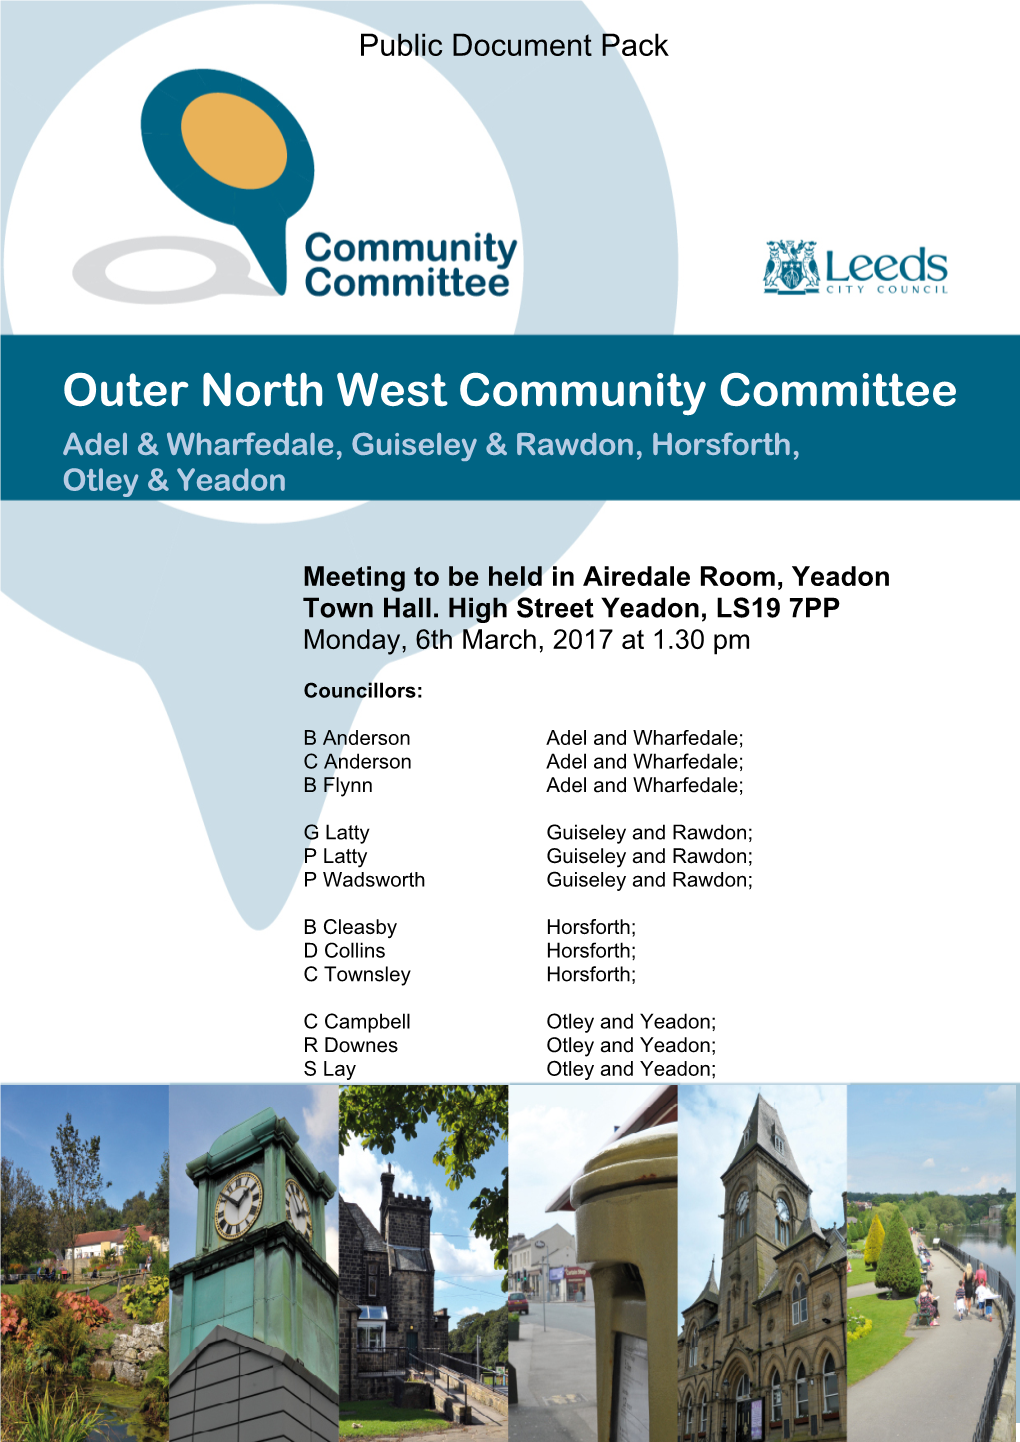 Outer North West Community Committee Adel & Wharfedale, Guiseley & Rawdon, Horsforth, Otley & Yeadon